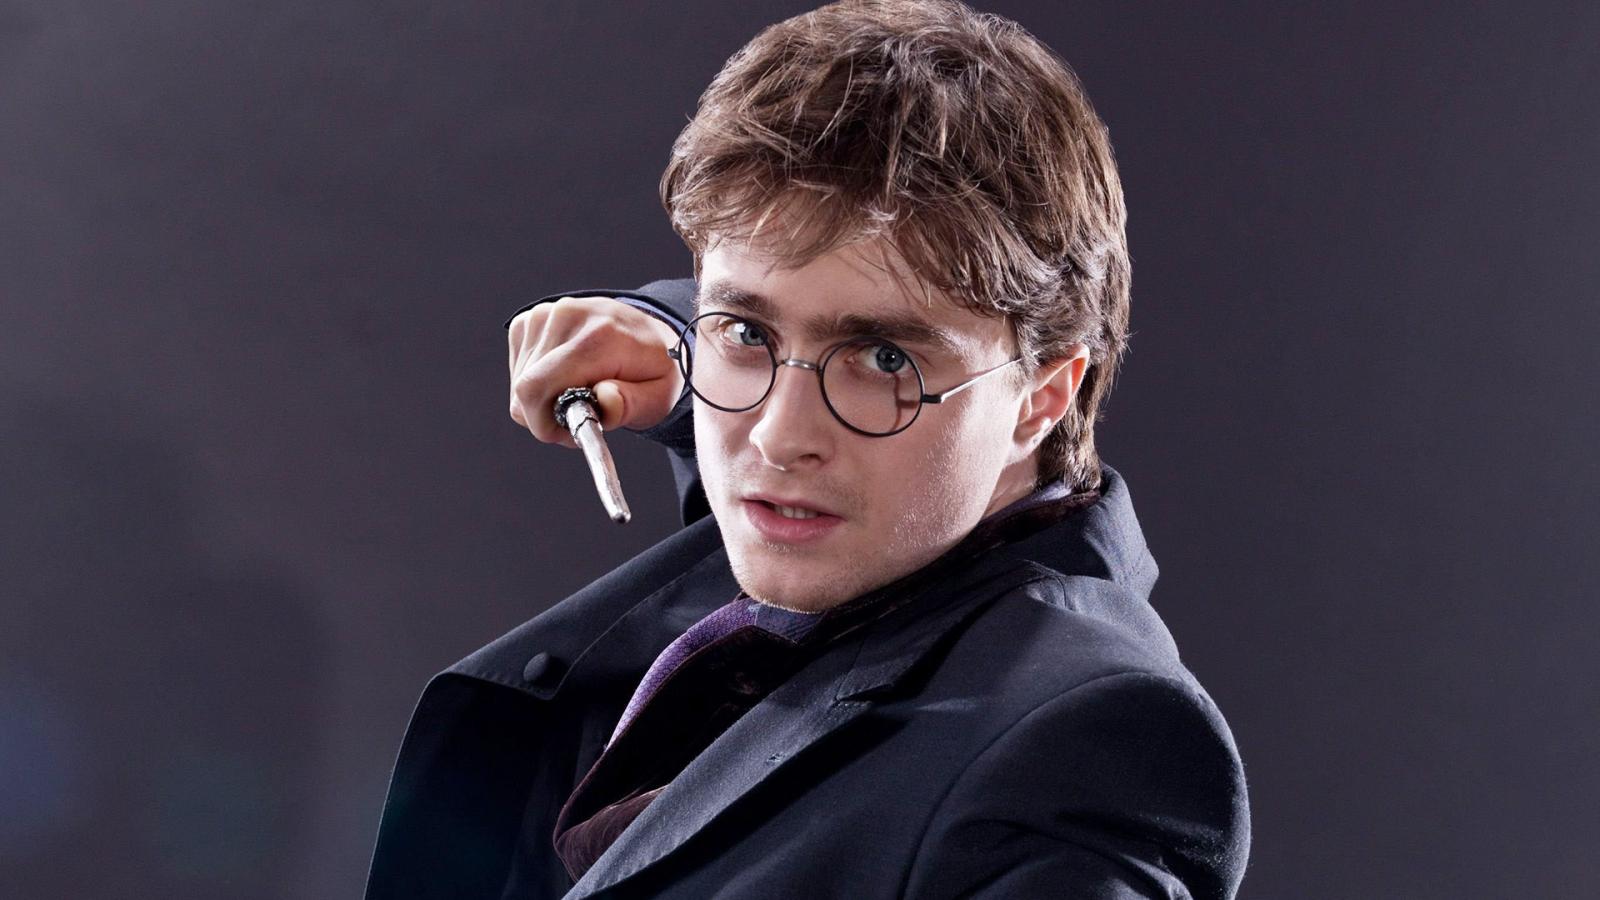 Out of All Harry Potter Villains, This One Daniel Radcliffe Really Admired - image 1